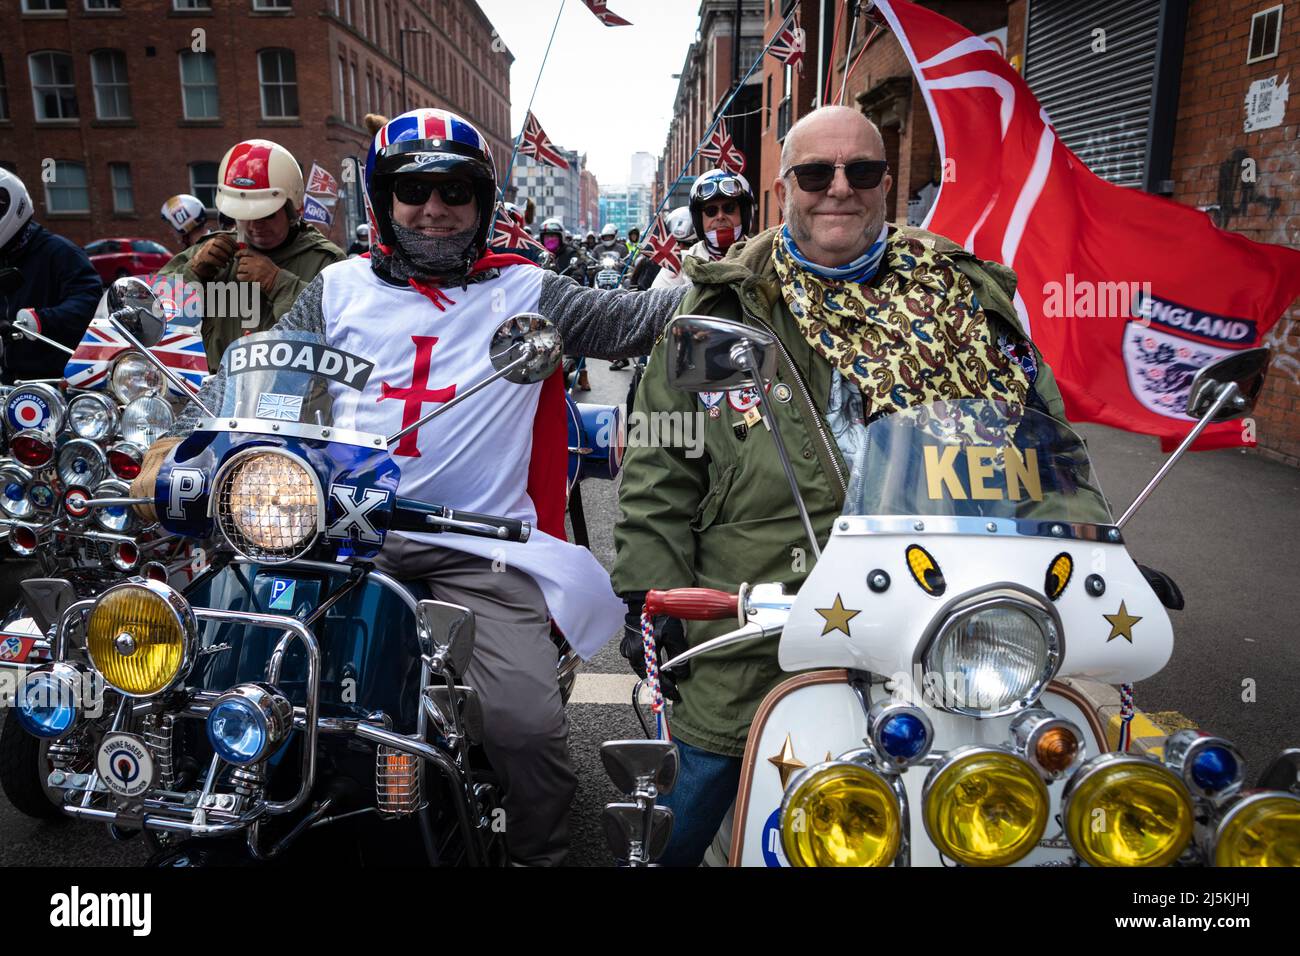 Manchester, UK. 24th Apr, 2022. Two Mod Scooters riders join the the annual St Georges Day parade as it passes through the city. Hundreds of people join in the annual celebration which marks the death of the patron Saint Of England.ÊAndy Barton/Alamy Live News Credit: Andy Barton/Alamy Live News Stock Photo